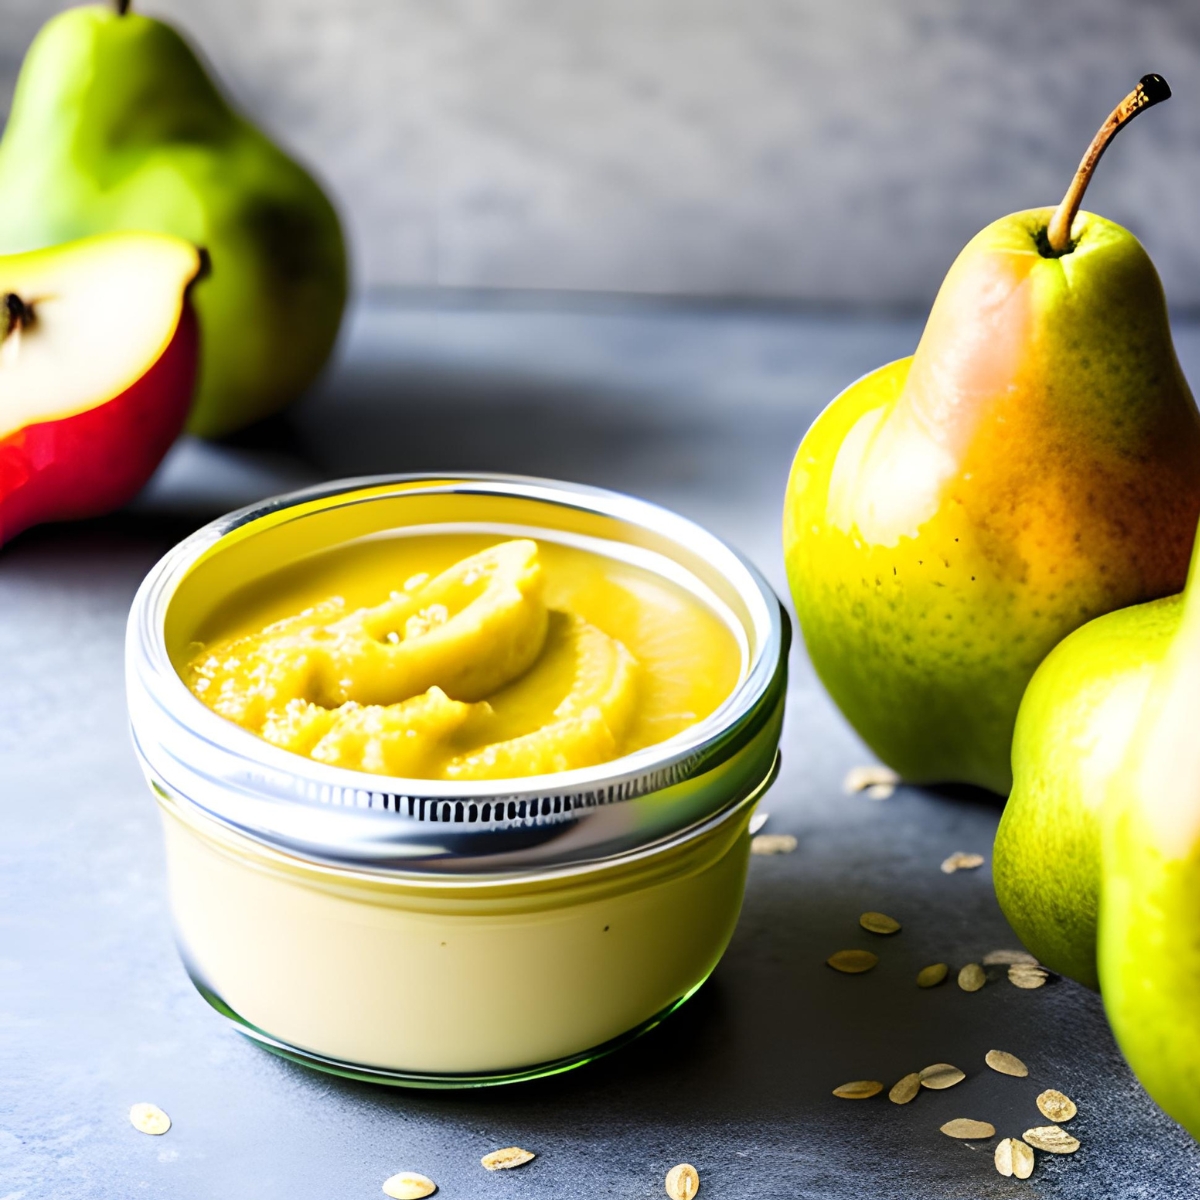 Small jar of pear and oatmeal puree with pears and cut apples